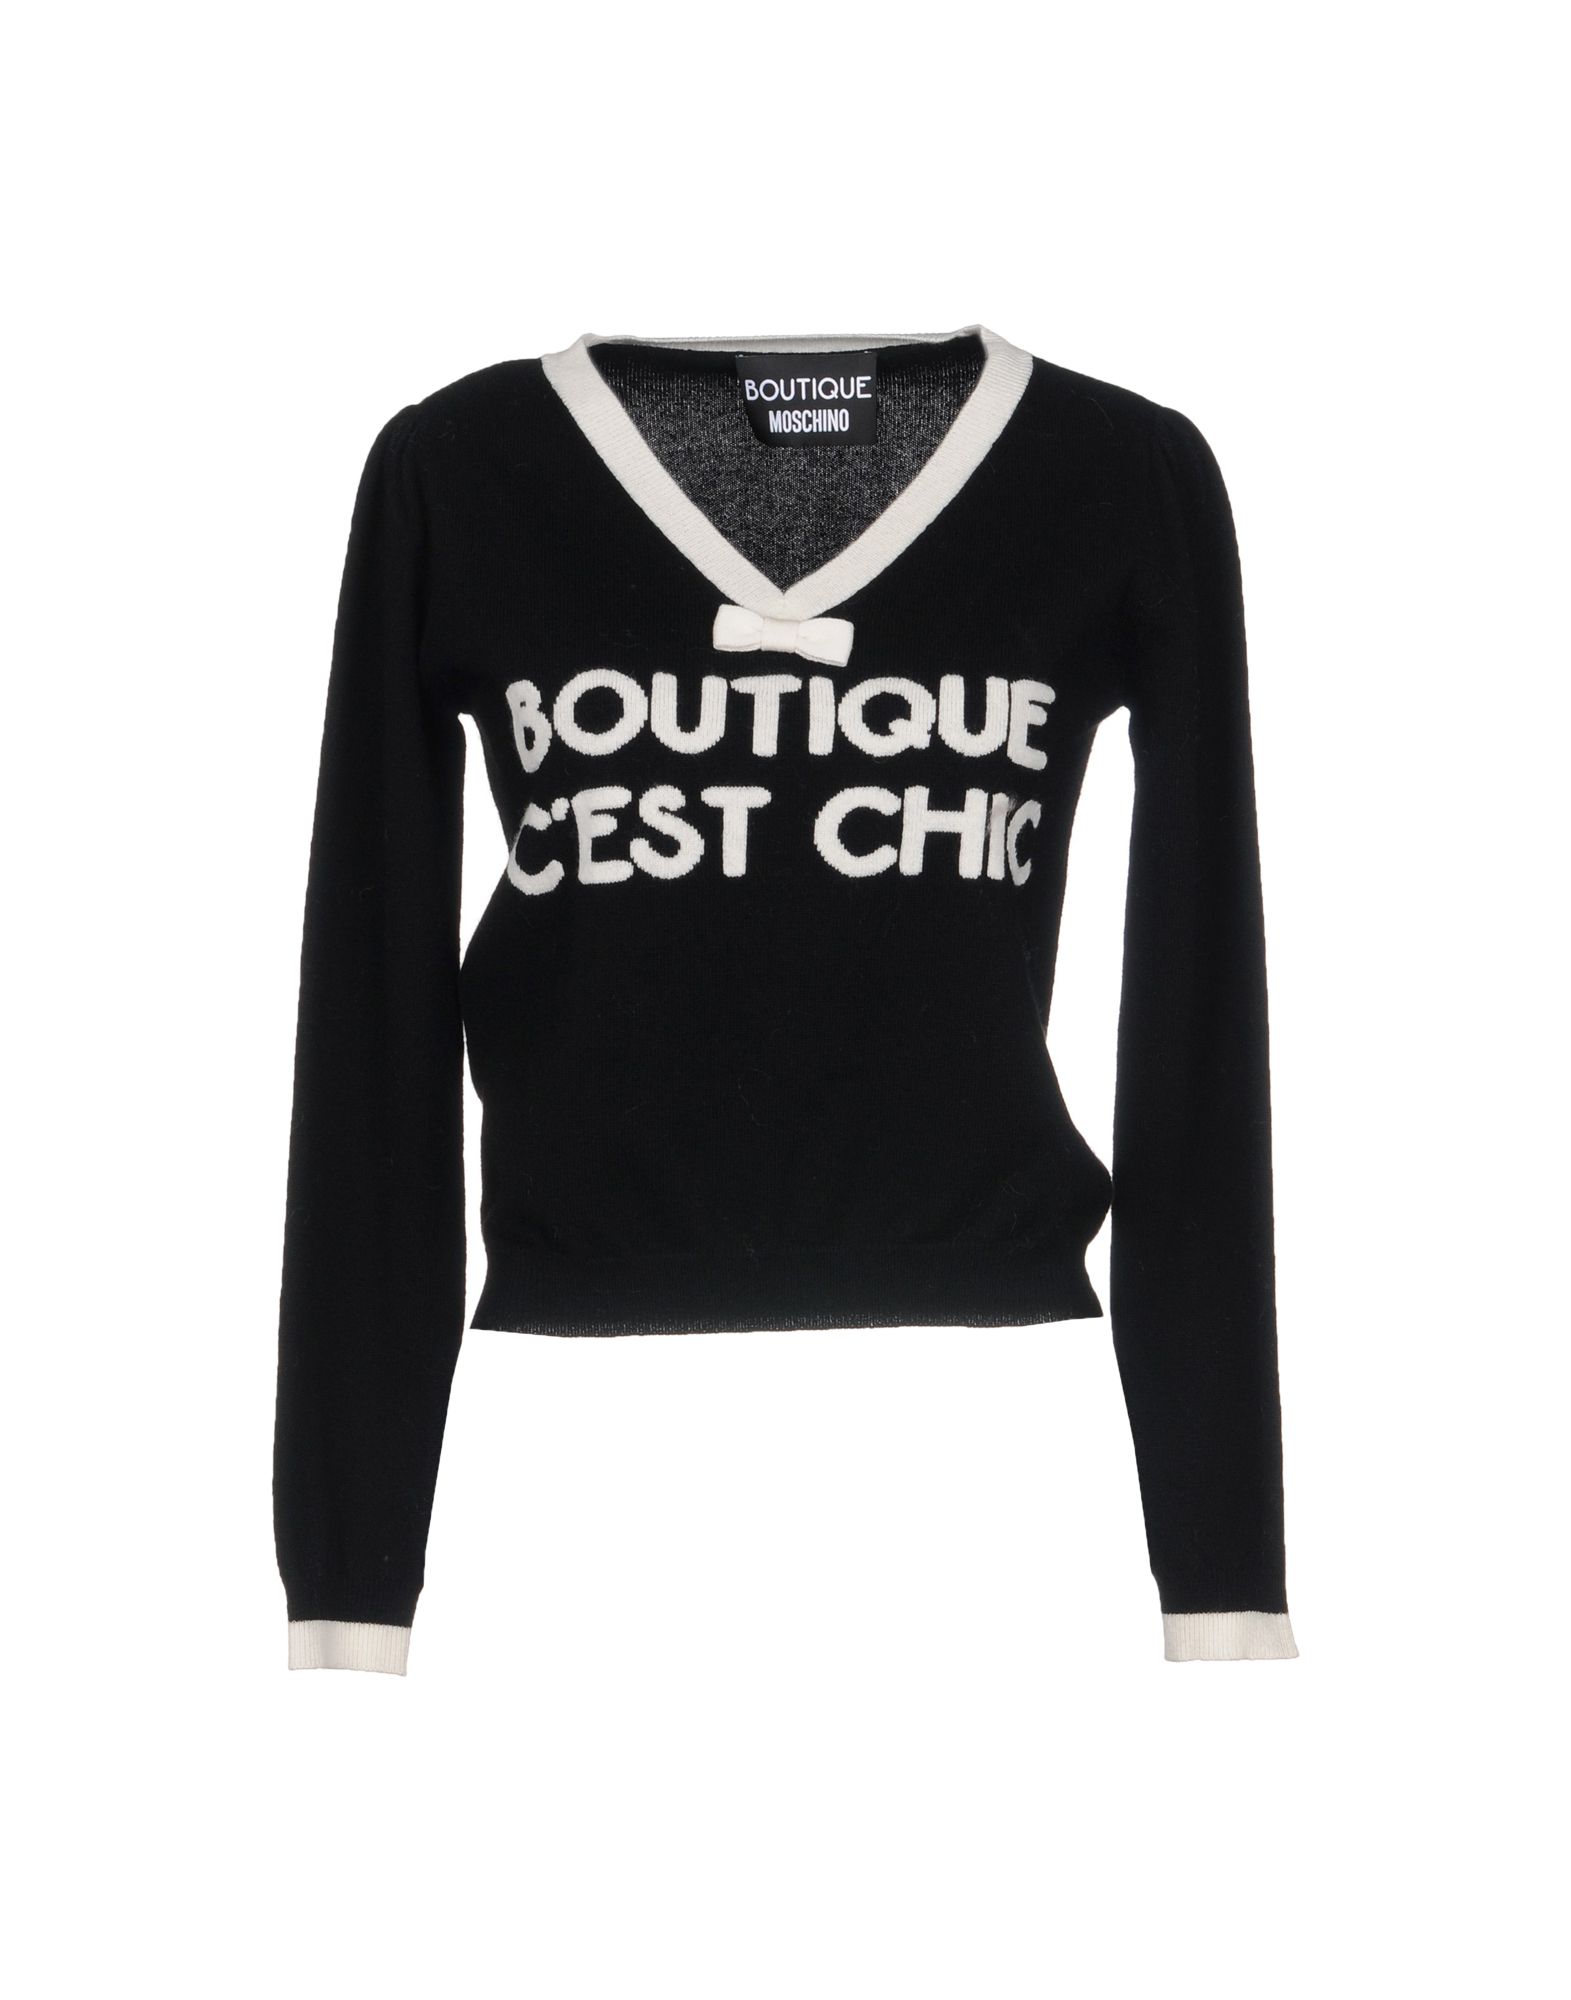 BOUTIQUE MOSCHINO Sweater,39846739DT 7